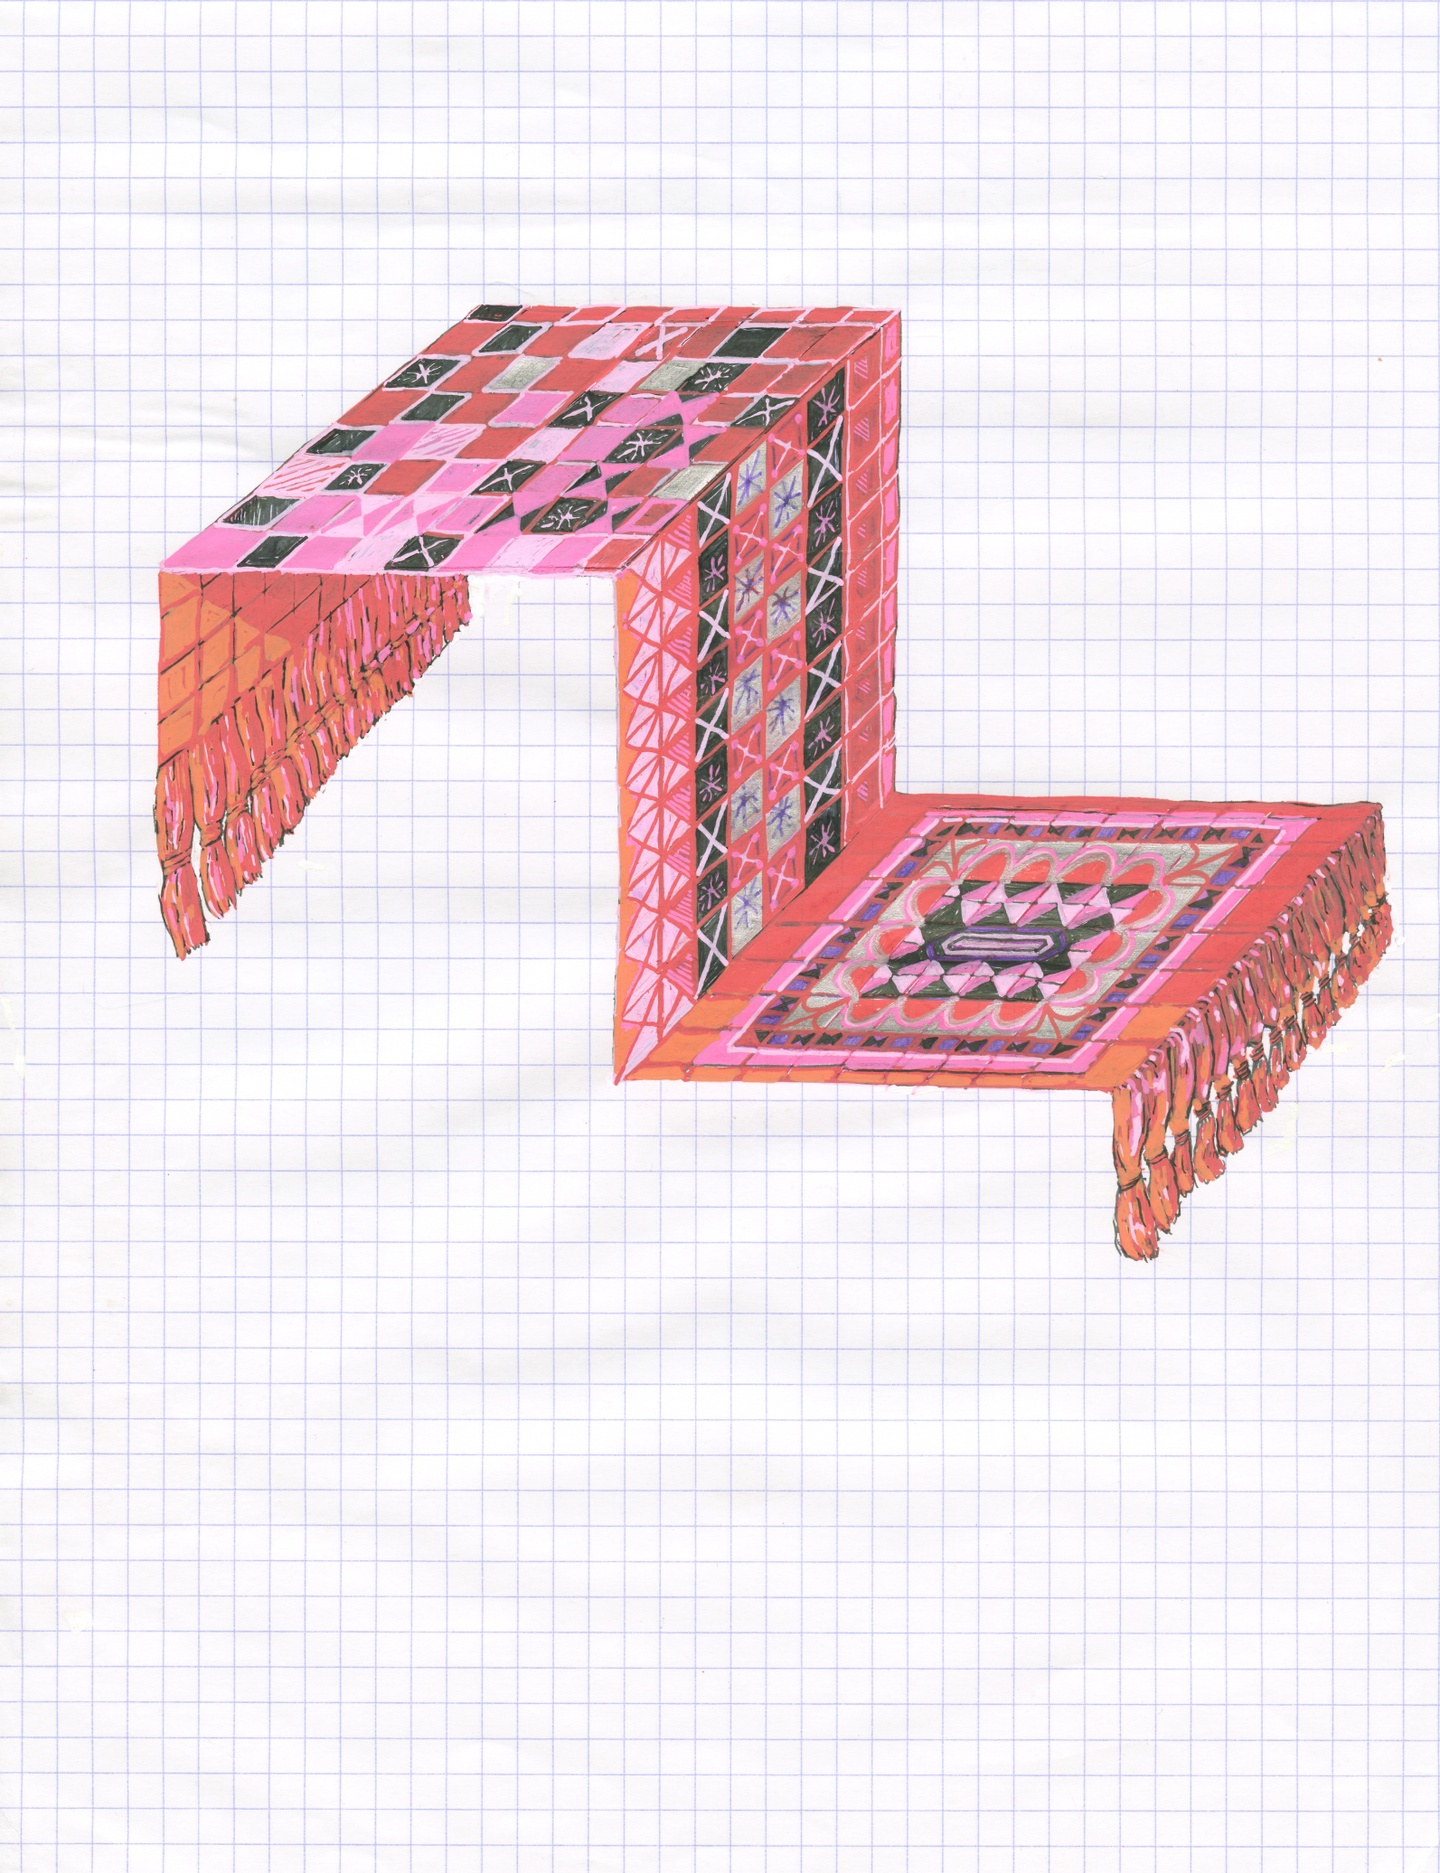 On a square-gridded background, a rug/carpet in red, pink, vermilion/orange, the pattern on which is geometric and its tassels in an orange/pink hue. The rug is depicted in a schematic way, as if resting/placed on invisible blocks, so that it drapes over the grid in a sharp manner.